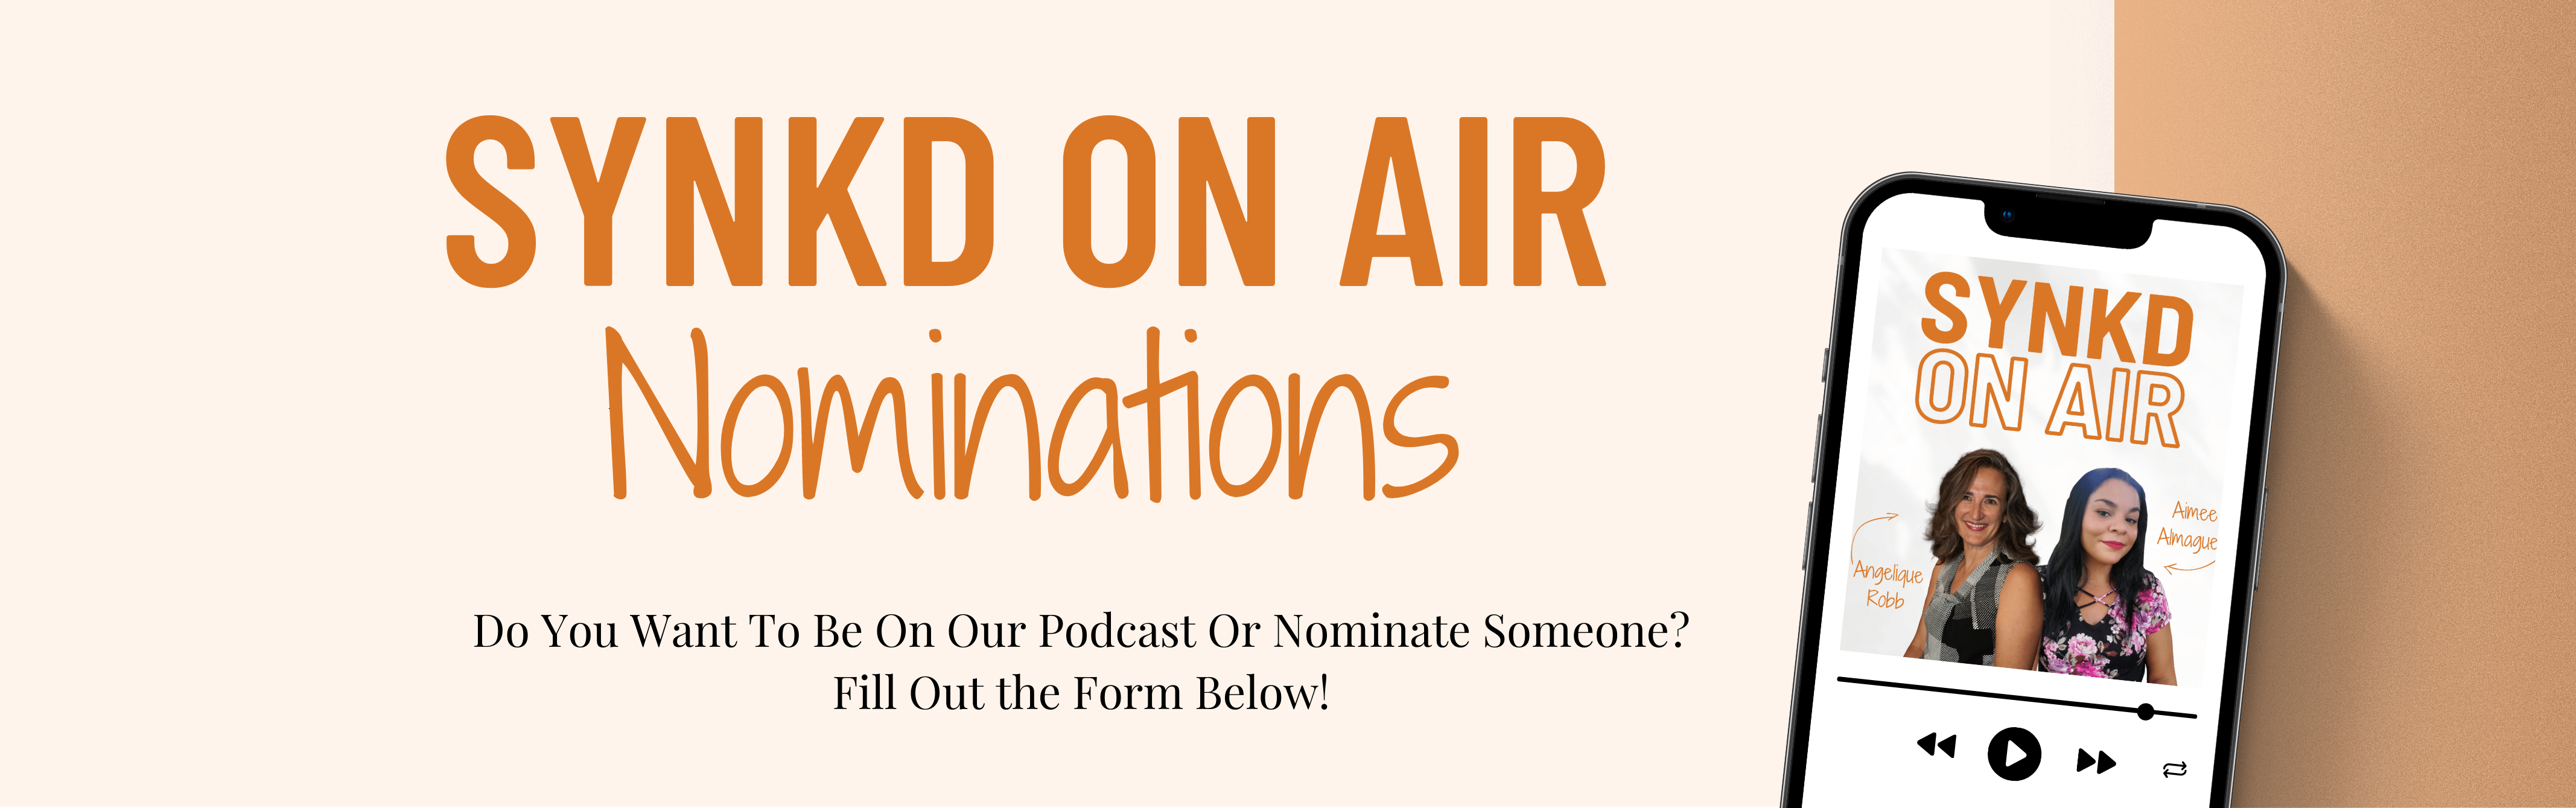 SYNKD On Air Nominations